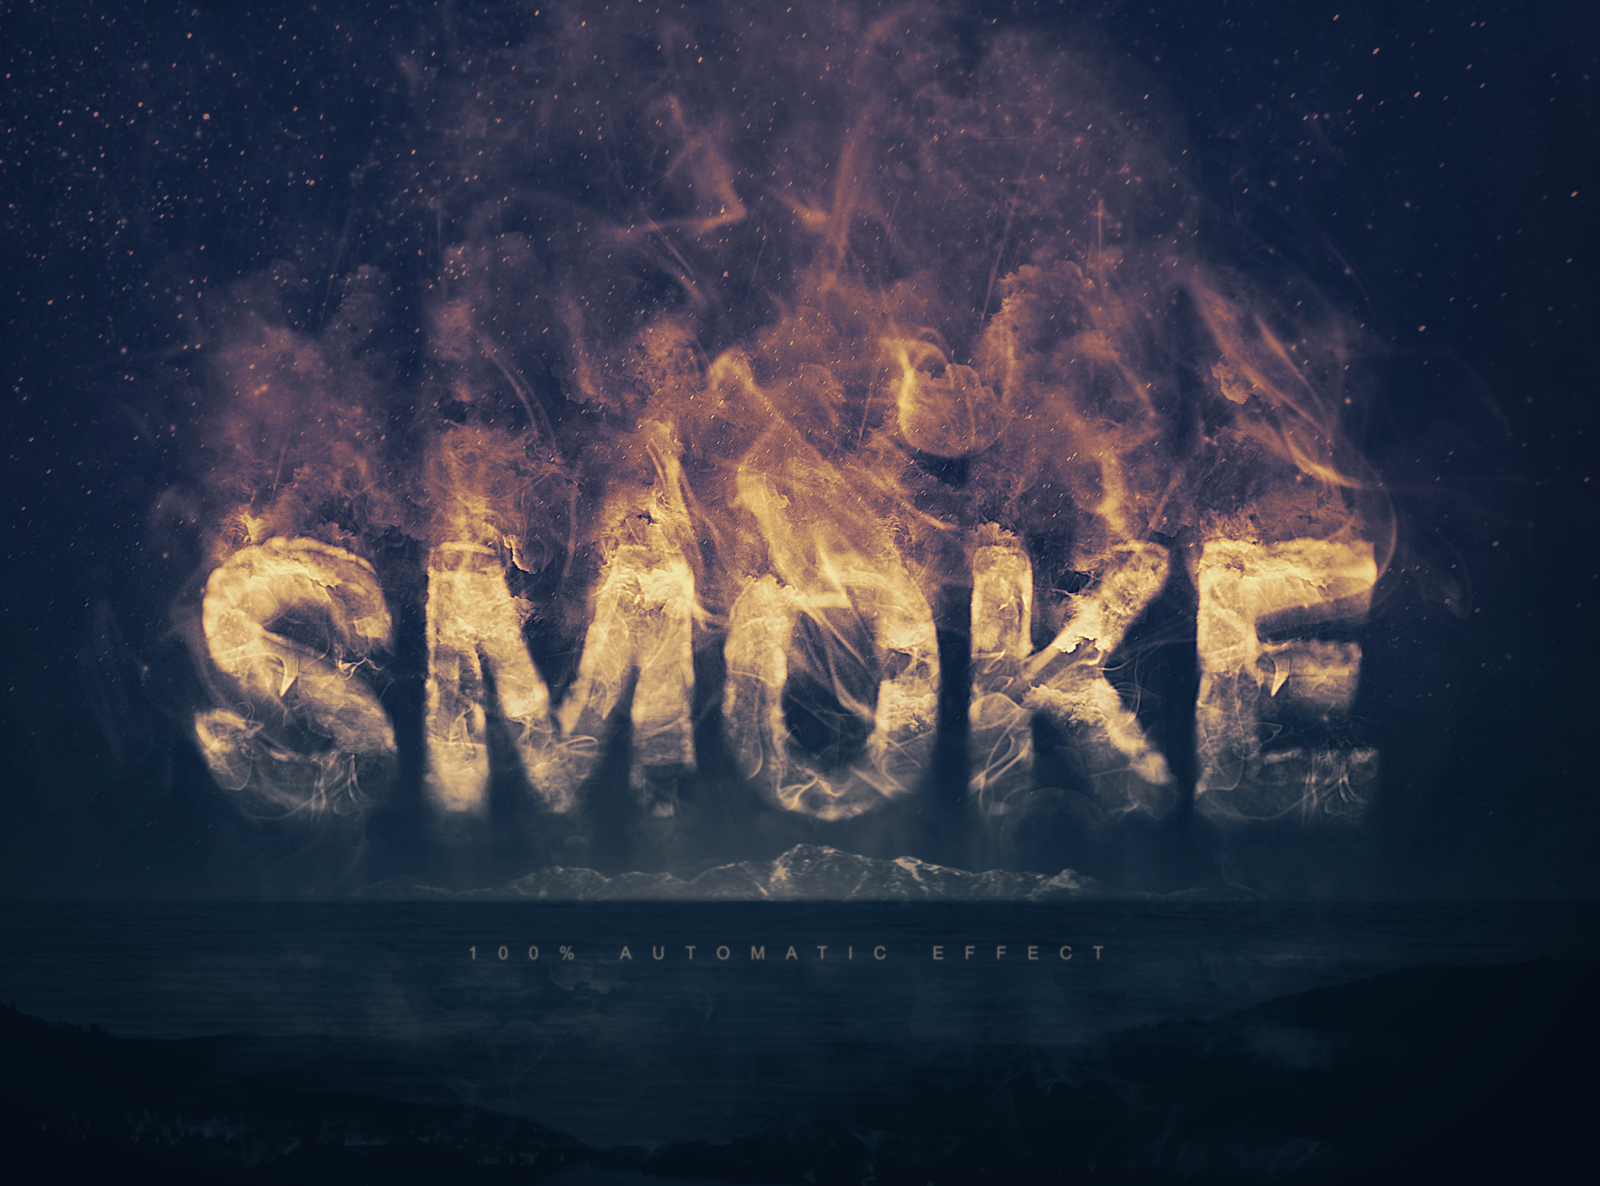 smoke-logo-text-effect-template-by-giallo-on-dribbble